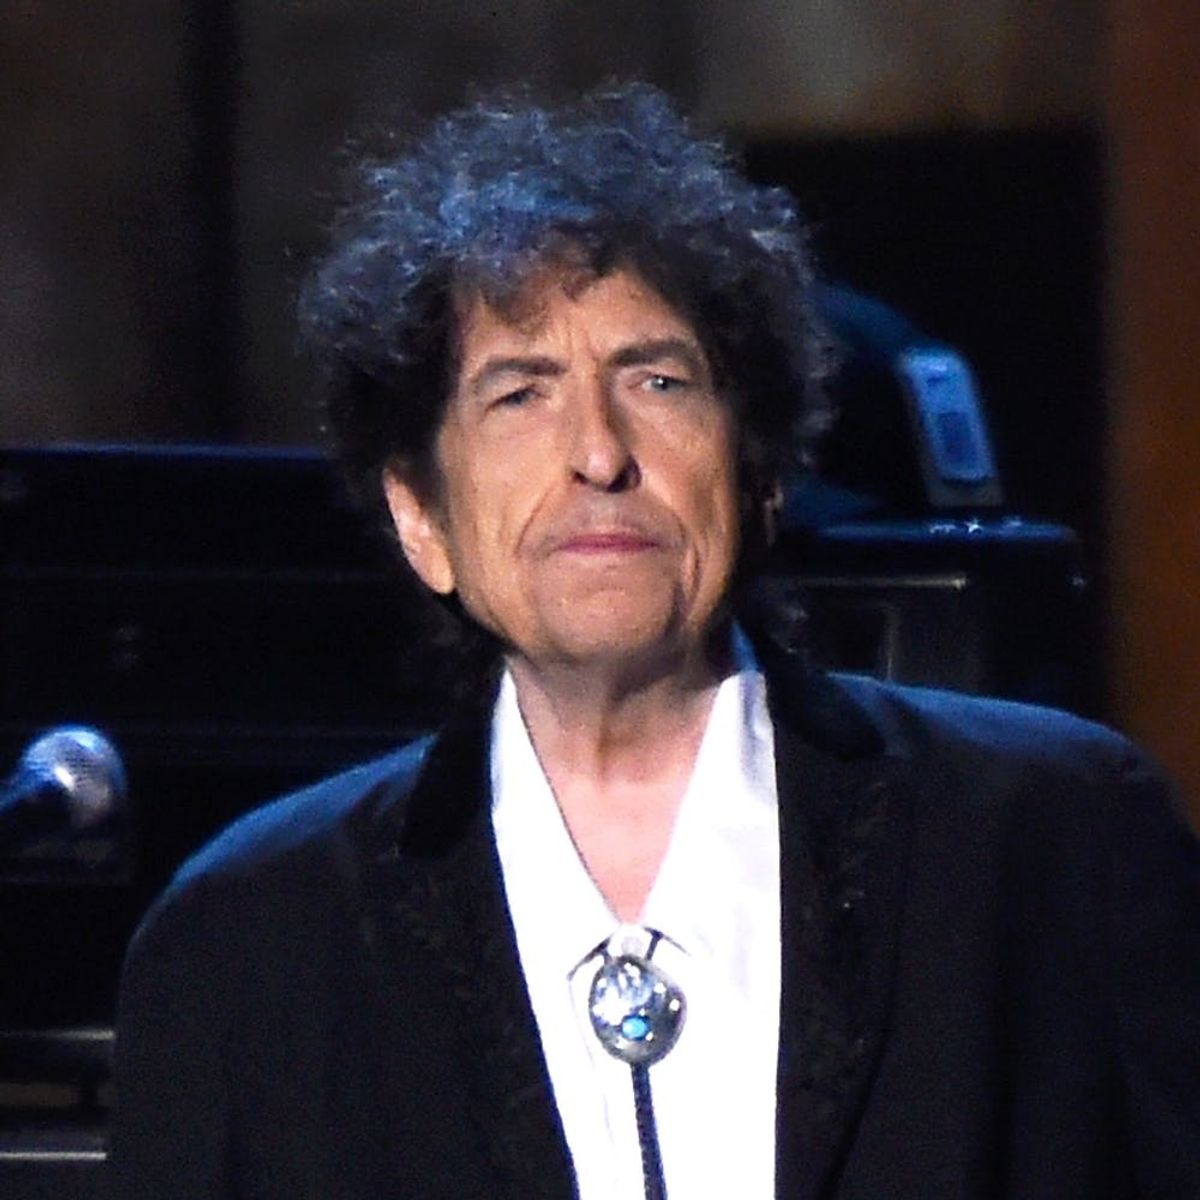 Bob Dylan Just Won the 2016 Nobel Prize in Literature and Folks Are FURIOUS!